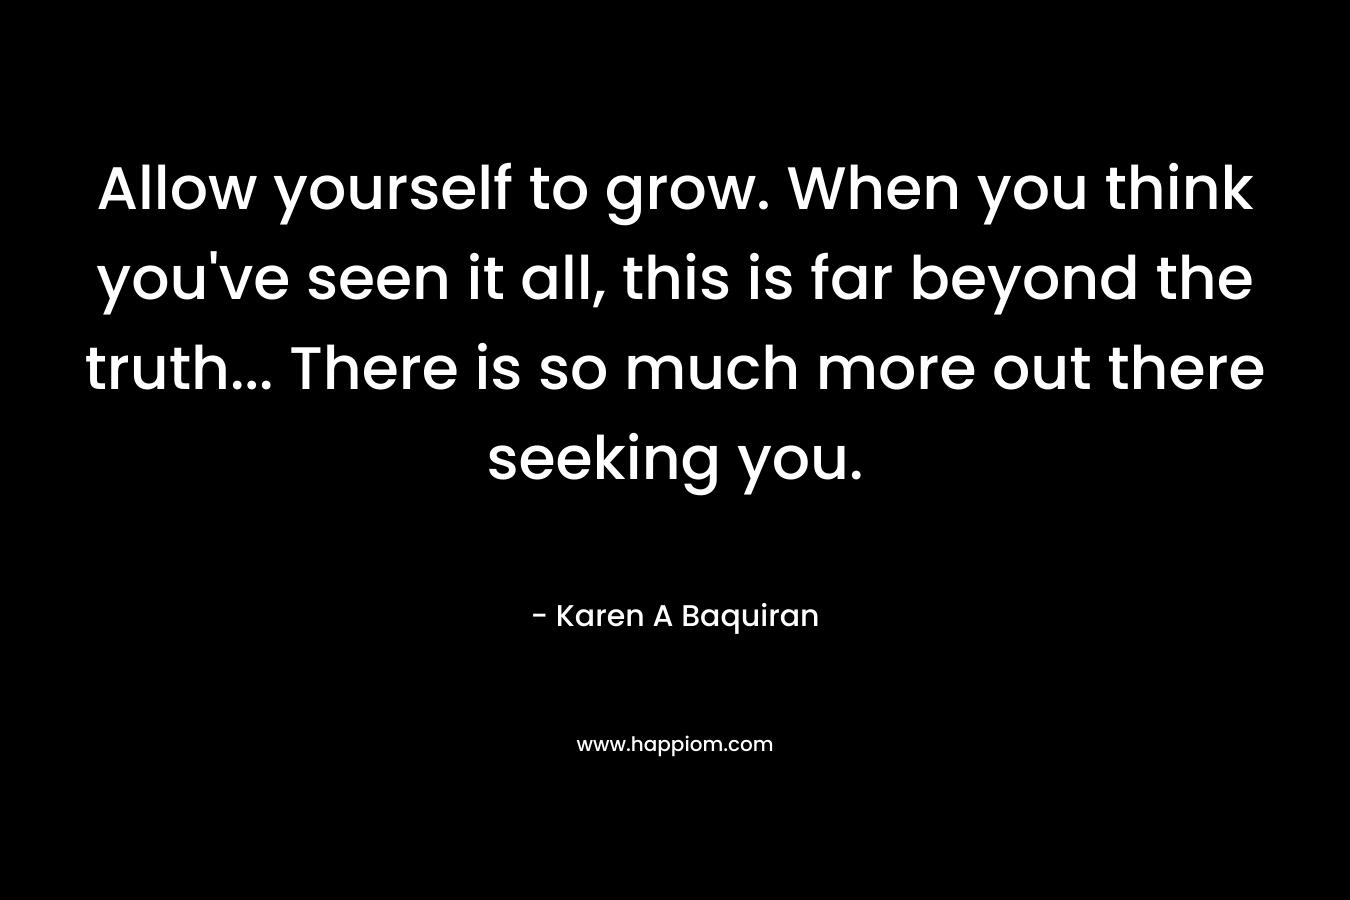 Allow yourself to grow. When you think you've seen it all, this is far beyond the truth... There is so much more out there seeking you.